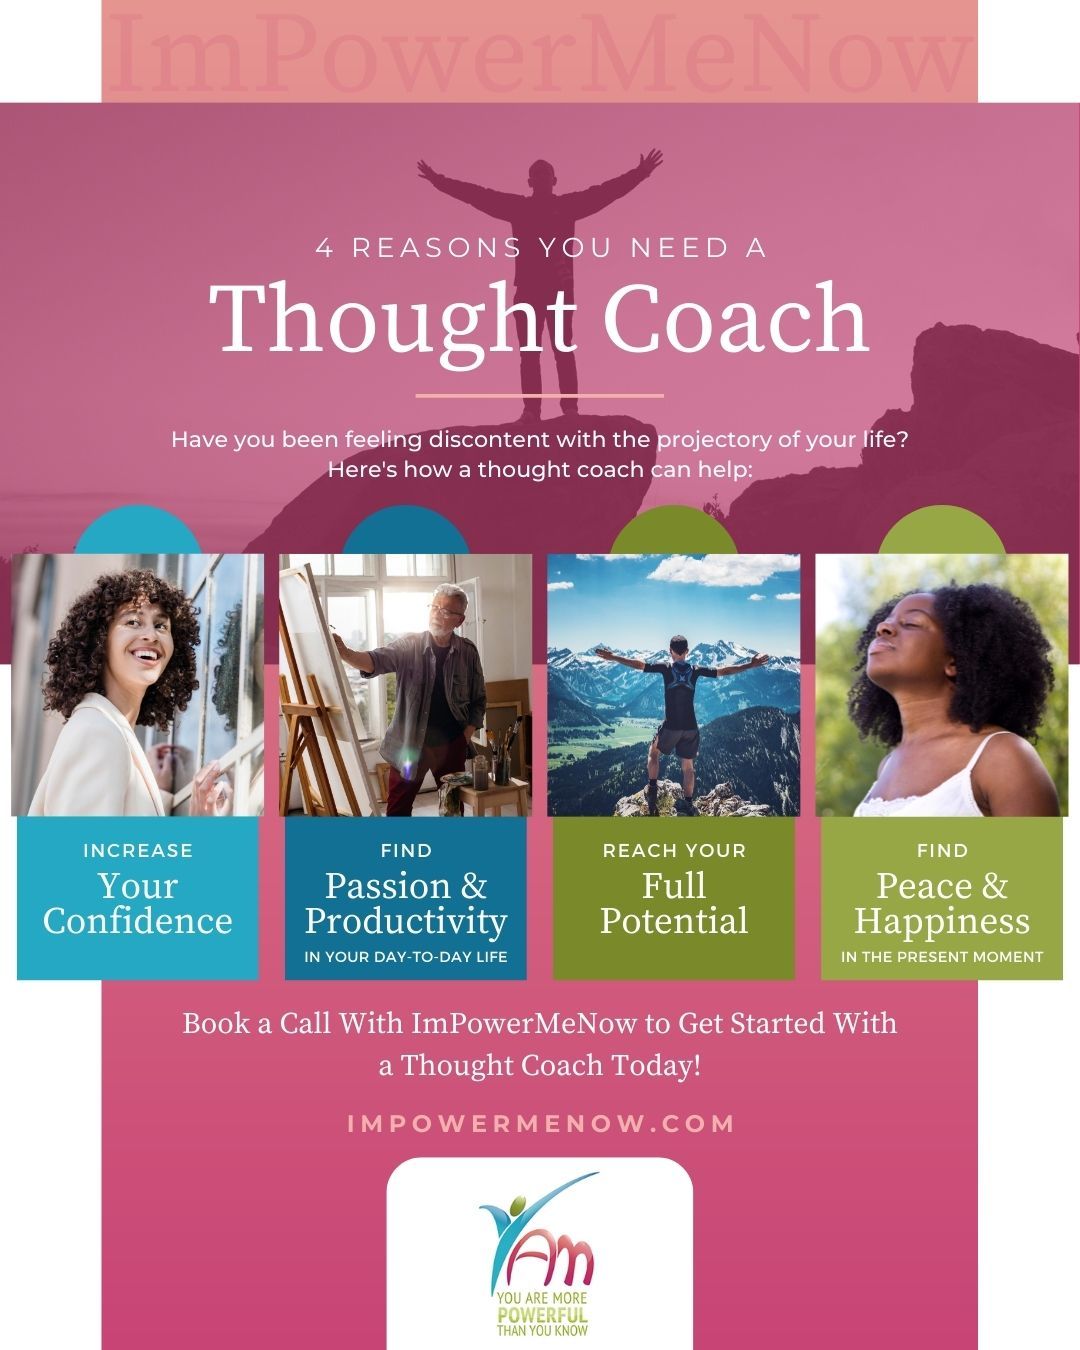 M35287 - ImPowerMeNow LLC - infographic - 4 Reasons You Need A Thought Coach (1).jpg